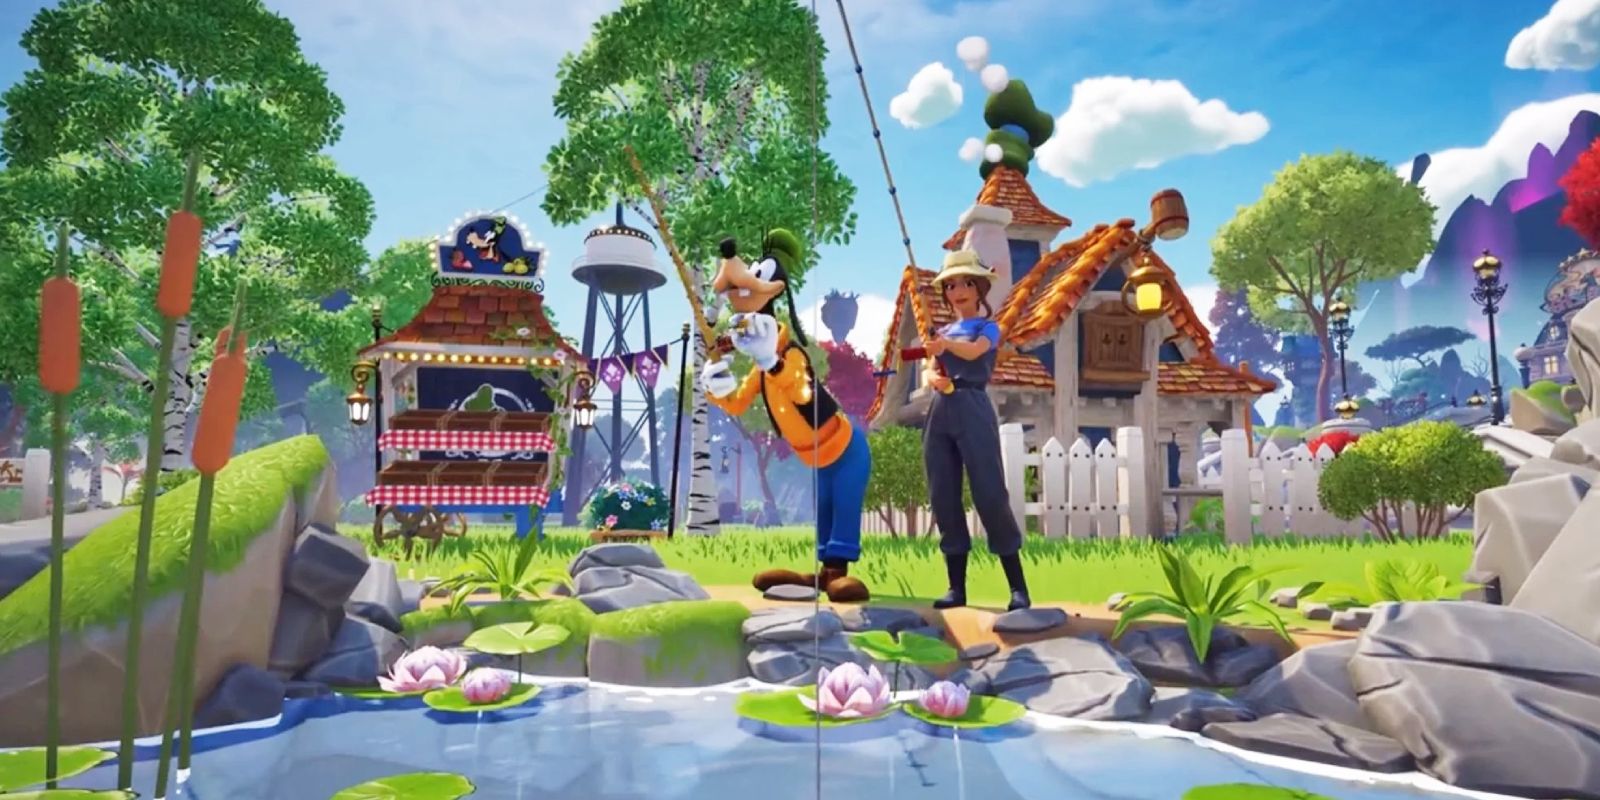 Every Character Confirmed For Disney Dreamlight Valley So Far Classic Goofy Mickey